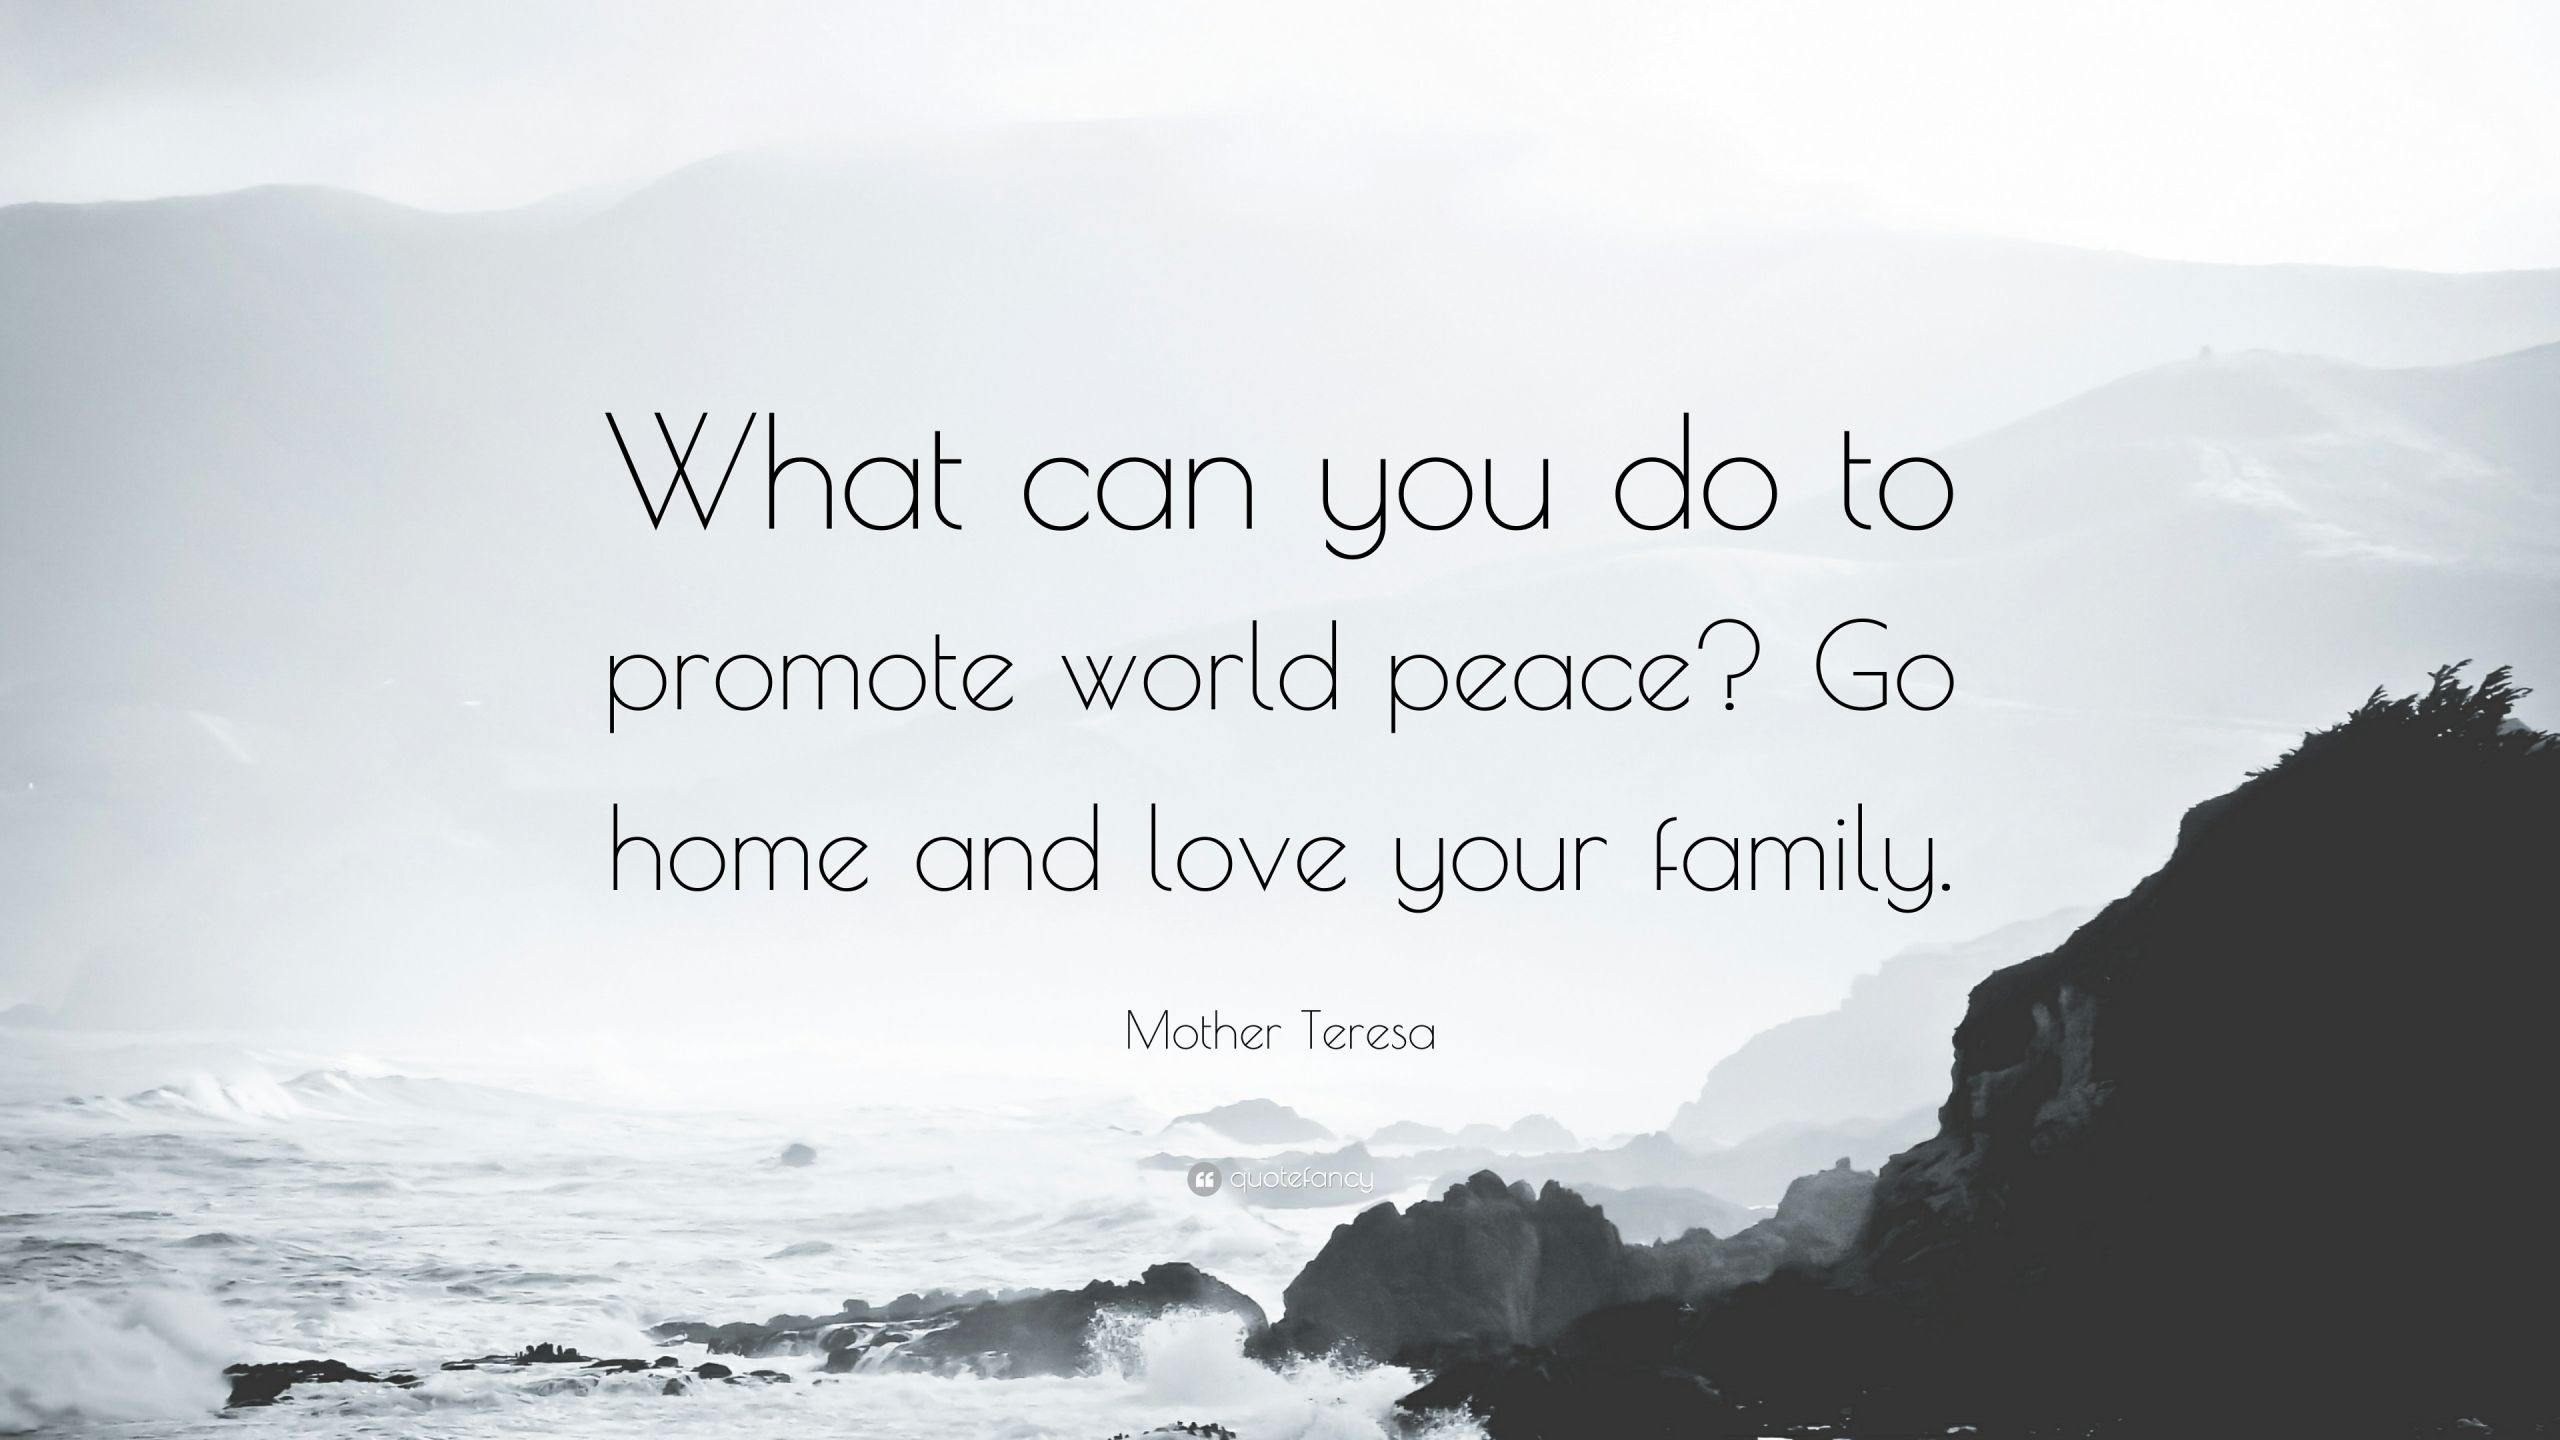 Mother Teresa Quotes On Family
 Mother Teresa Quote “What can you do to promote world